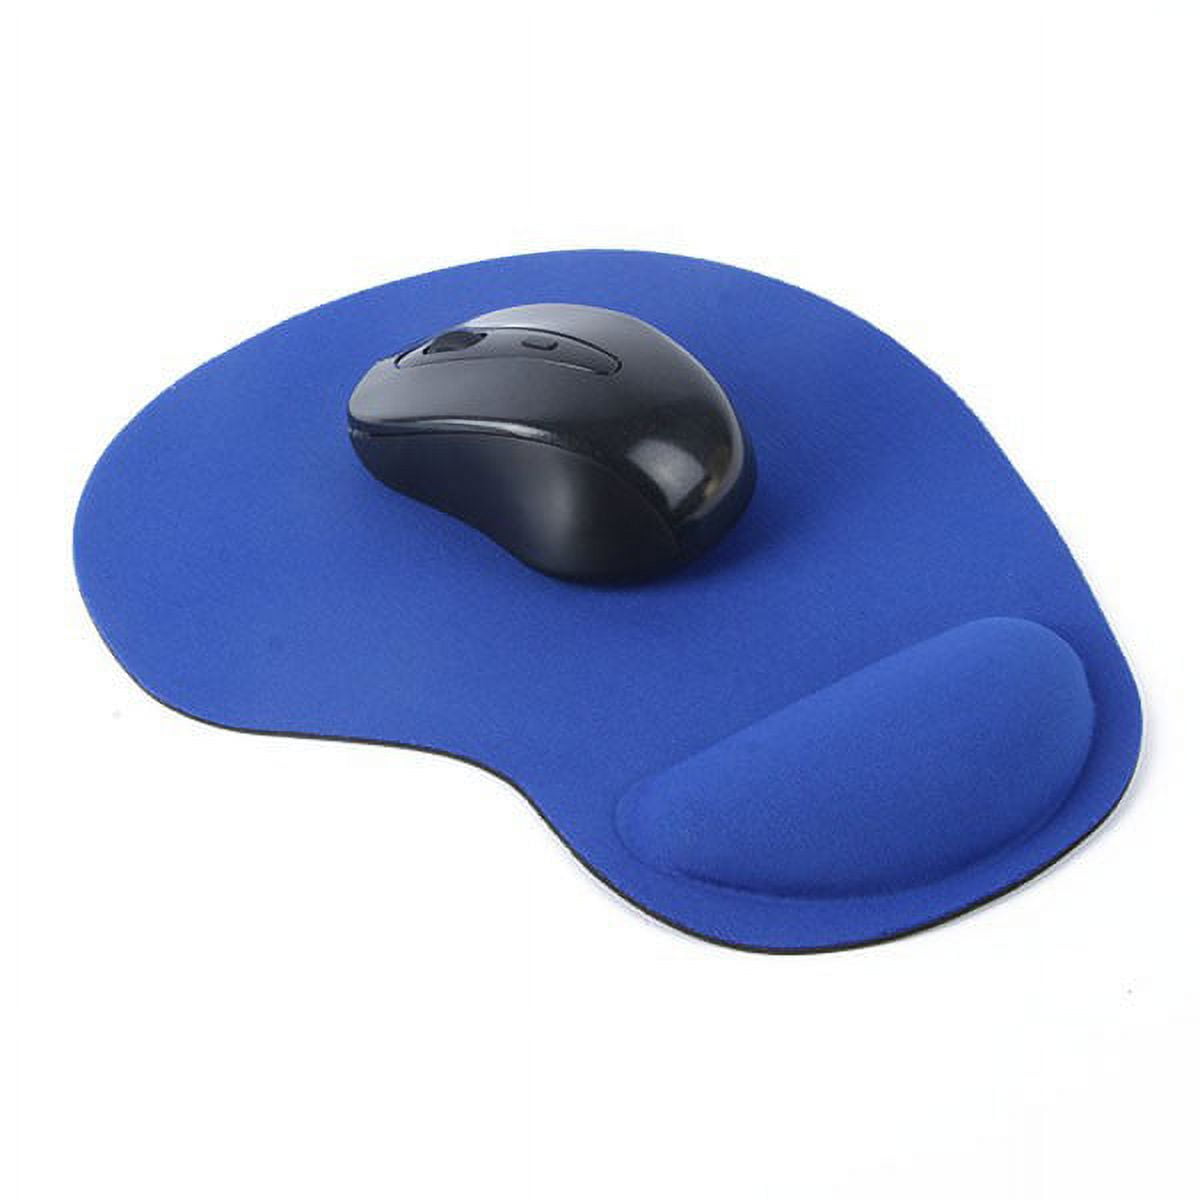 14 Styles Ergonomic Mouse Pad With Wrist Support ，Computer Mouse